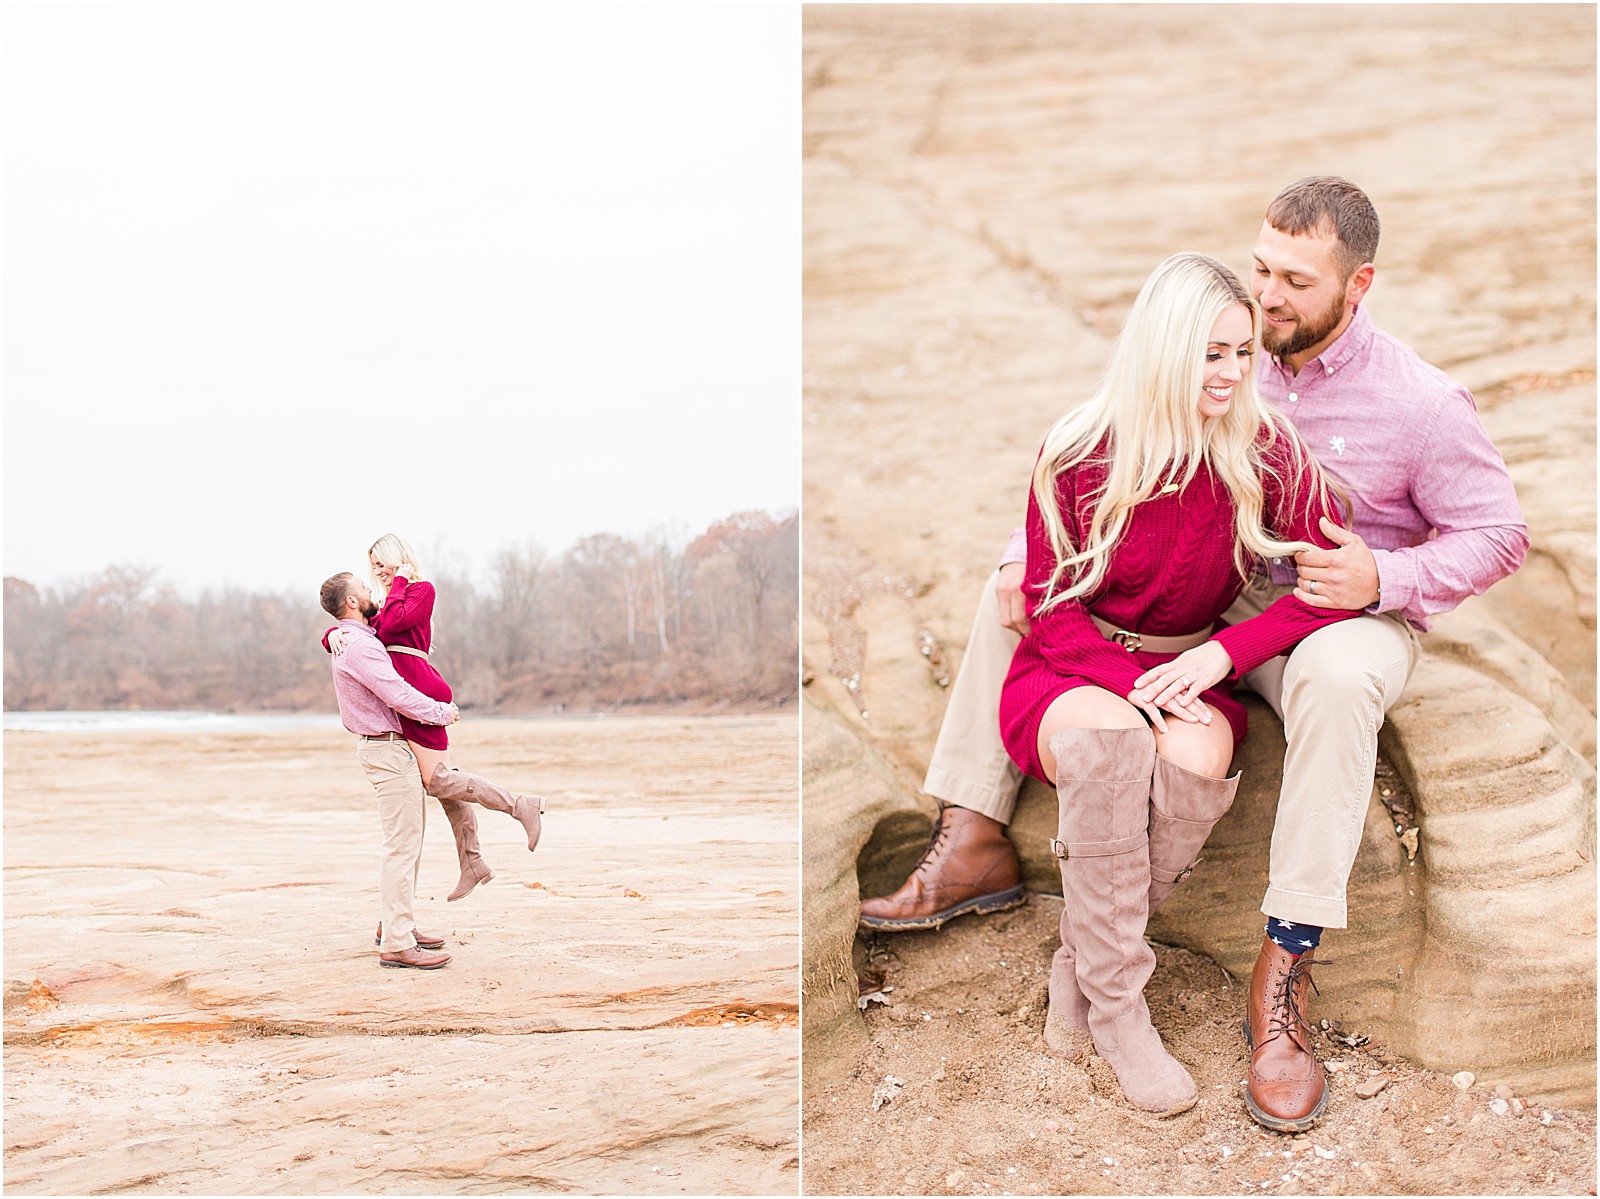 An sweet and snuggly fall anniversary session in Loogootee, Indiana. | #anniversarysession #fallsession #southernindianawedding | 024.jpg